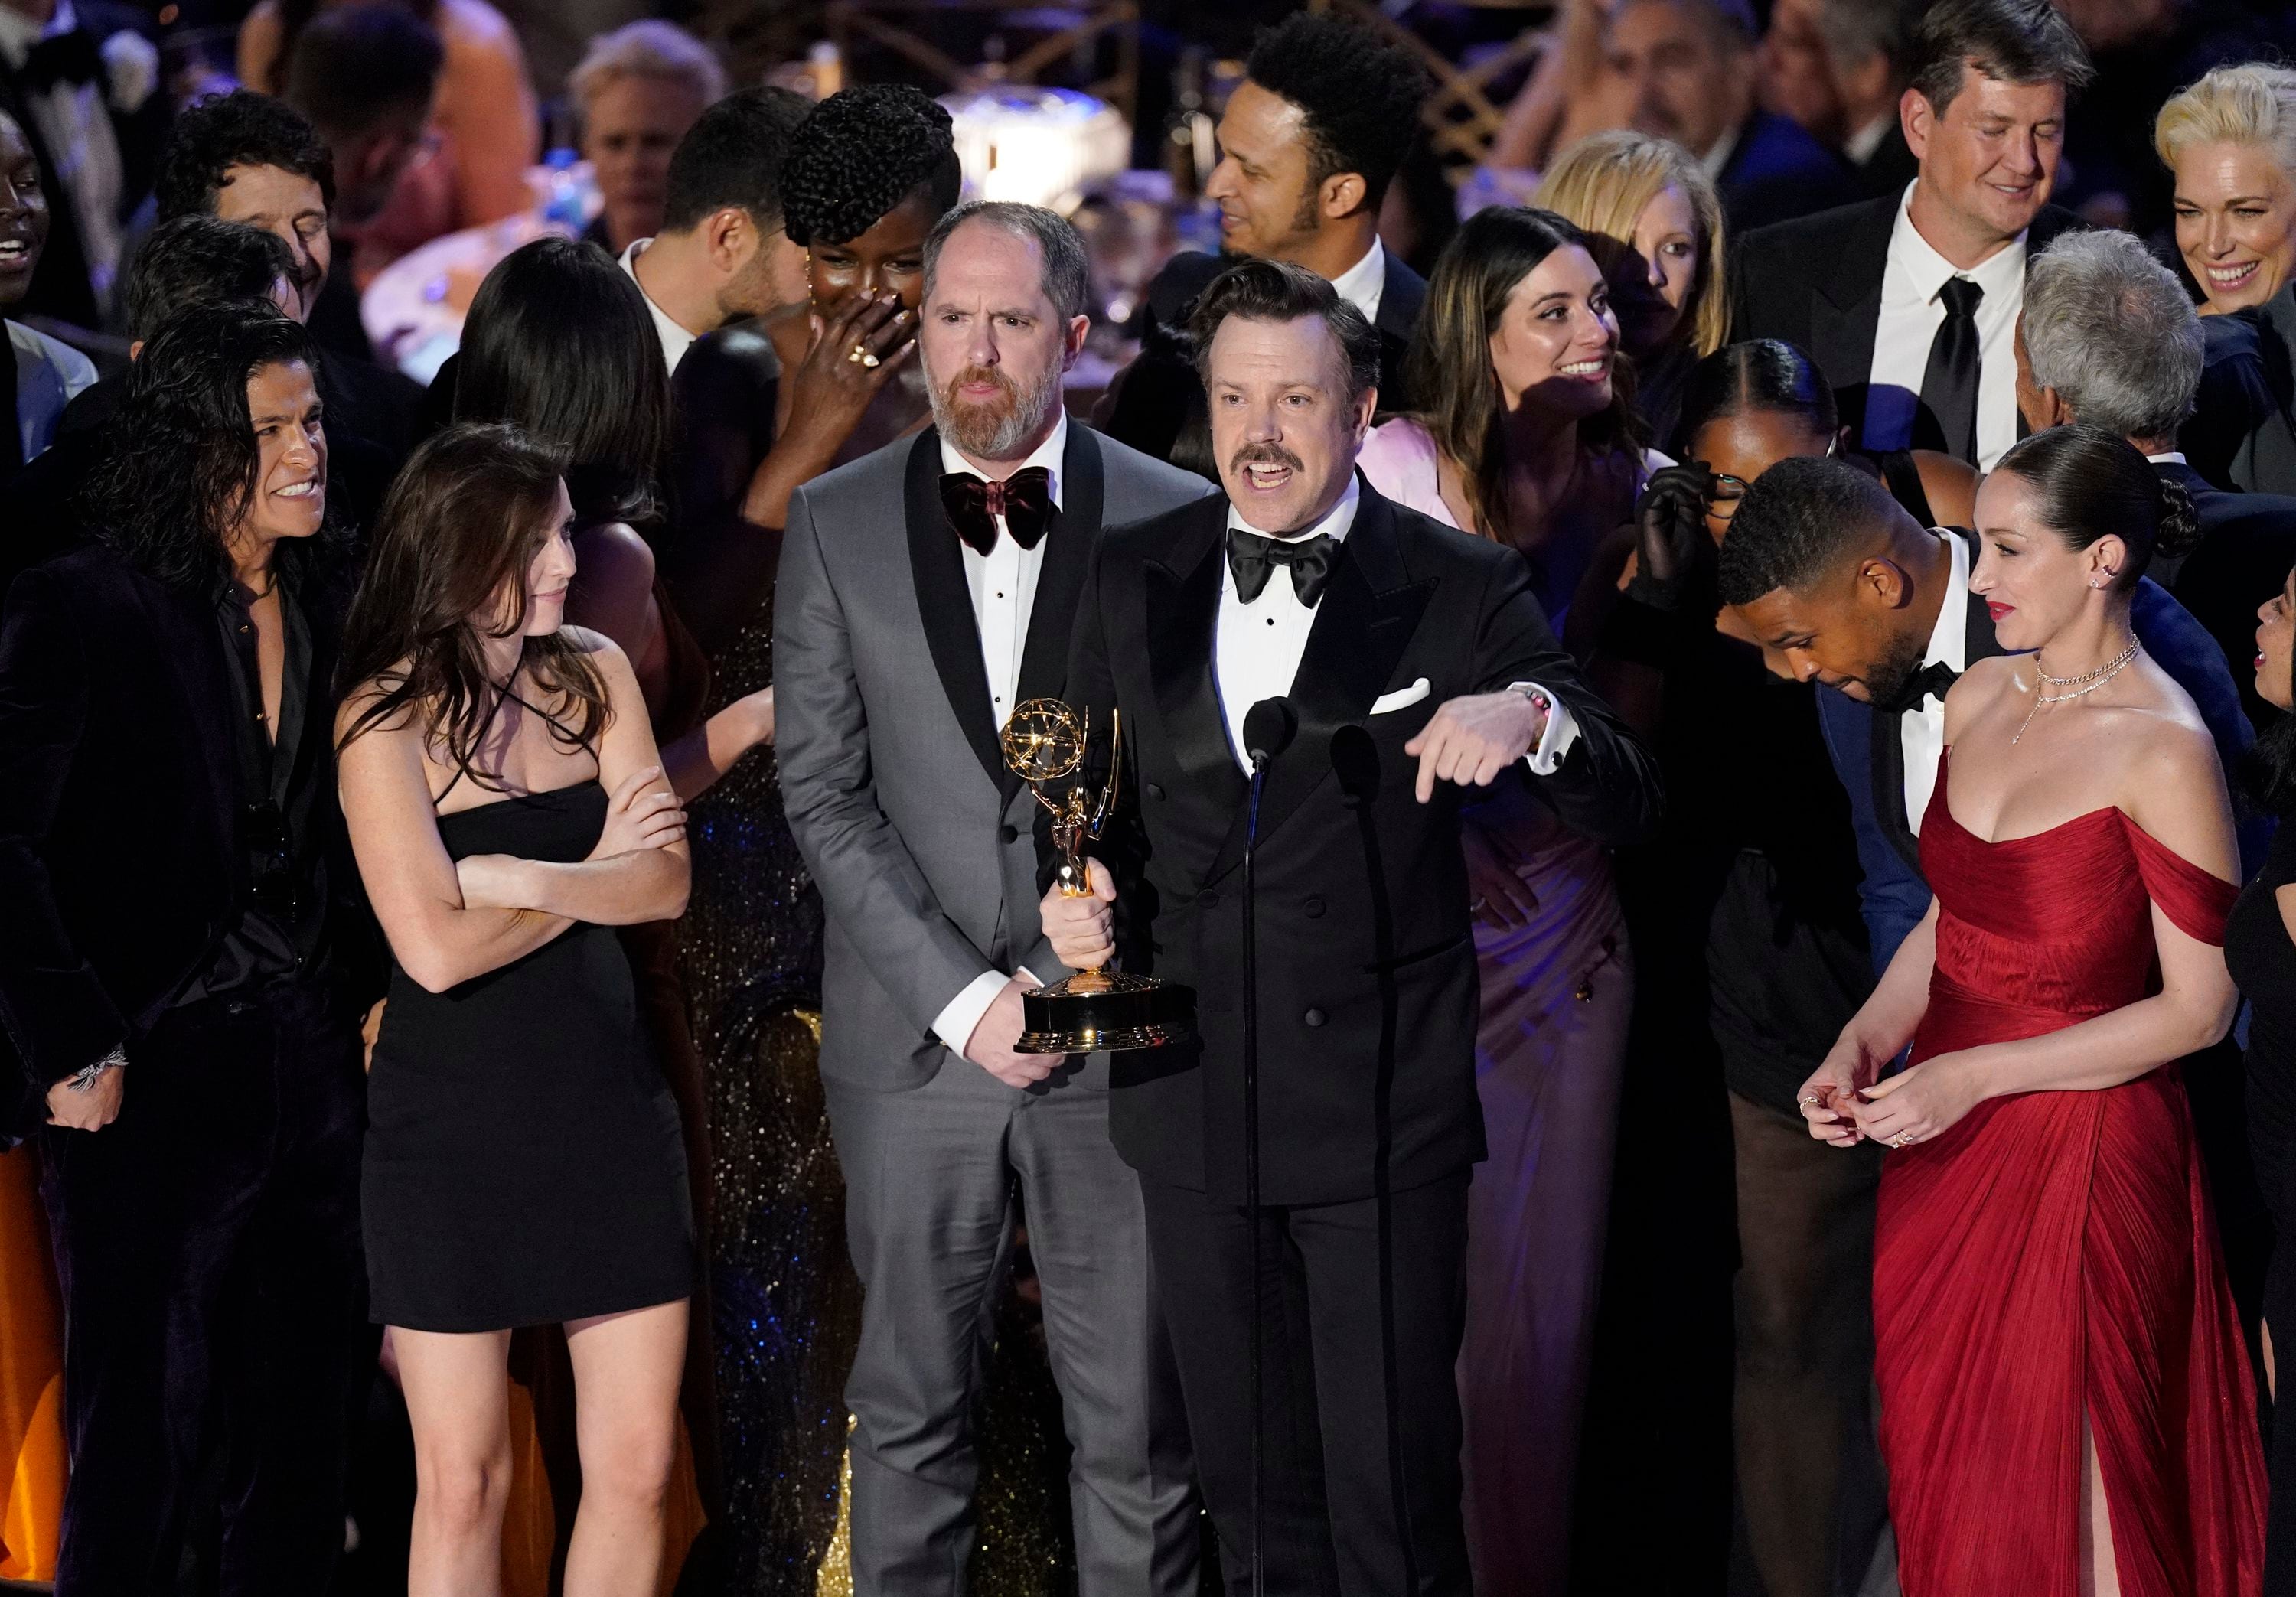 Emmys reach record-low audience of 5.9 million people